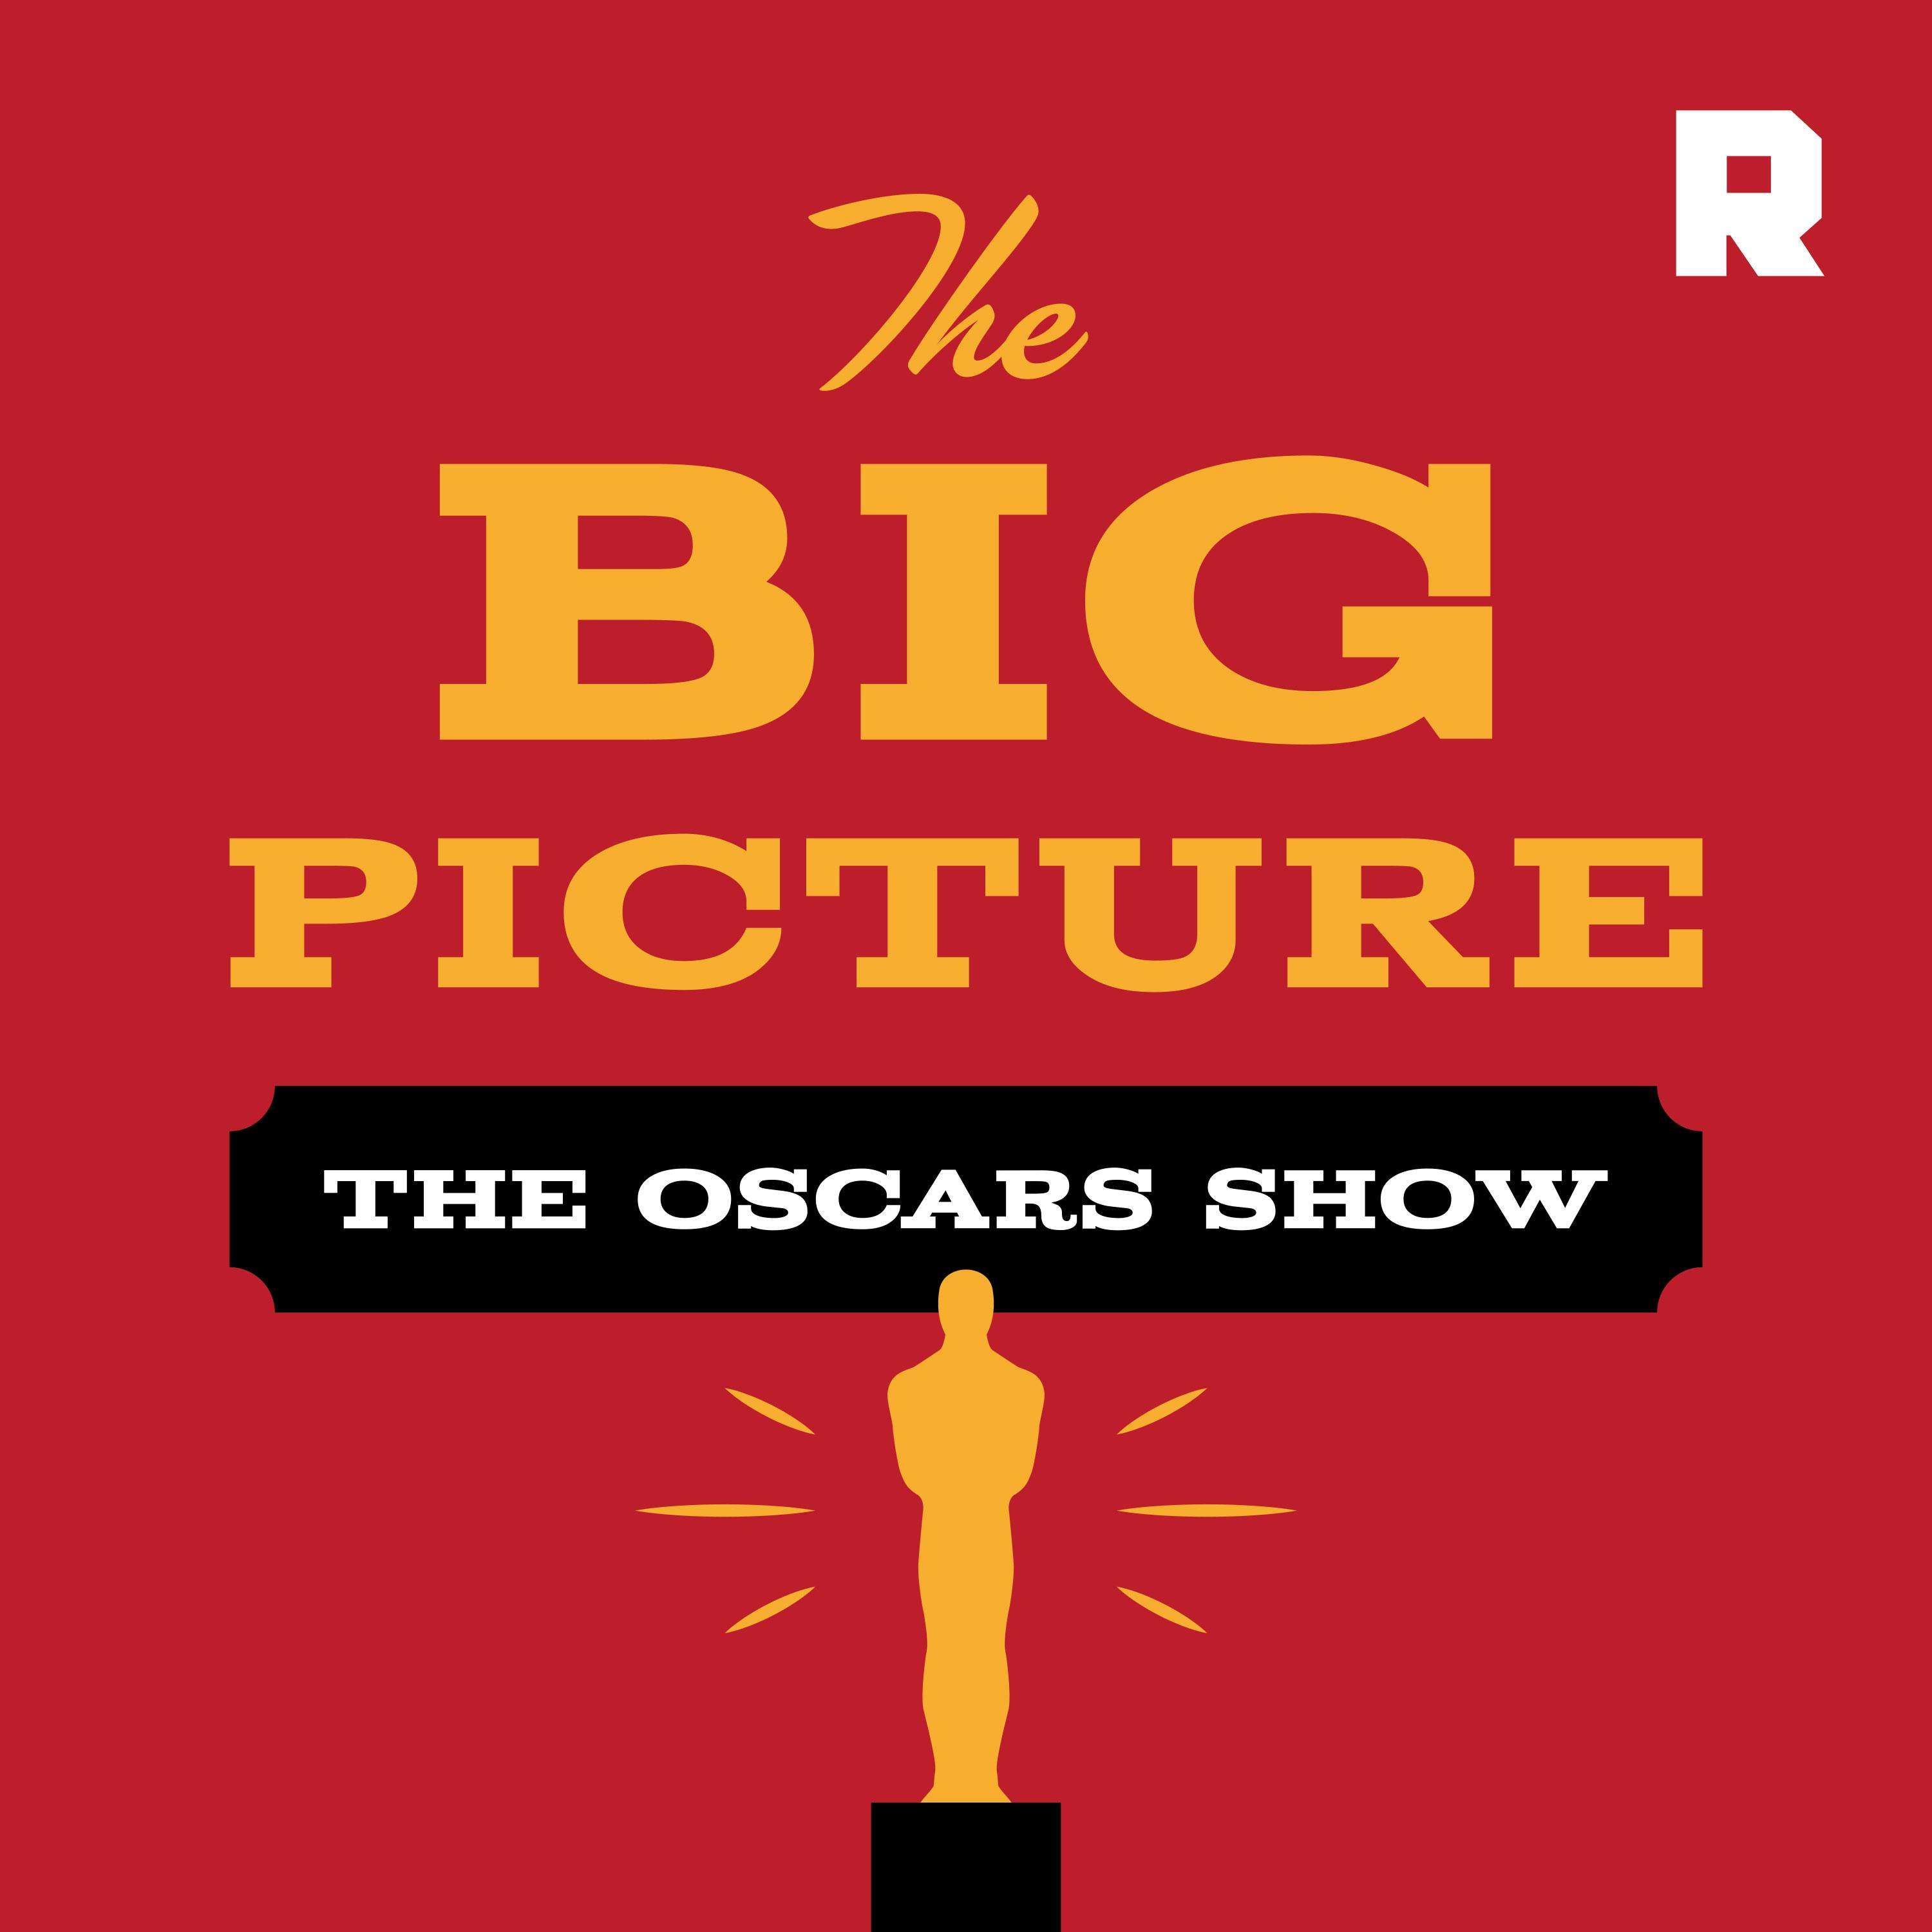 The Oscars Show Returns: The Five Best Movies at the Fall Festivals … So Far